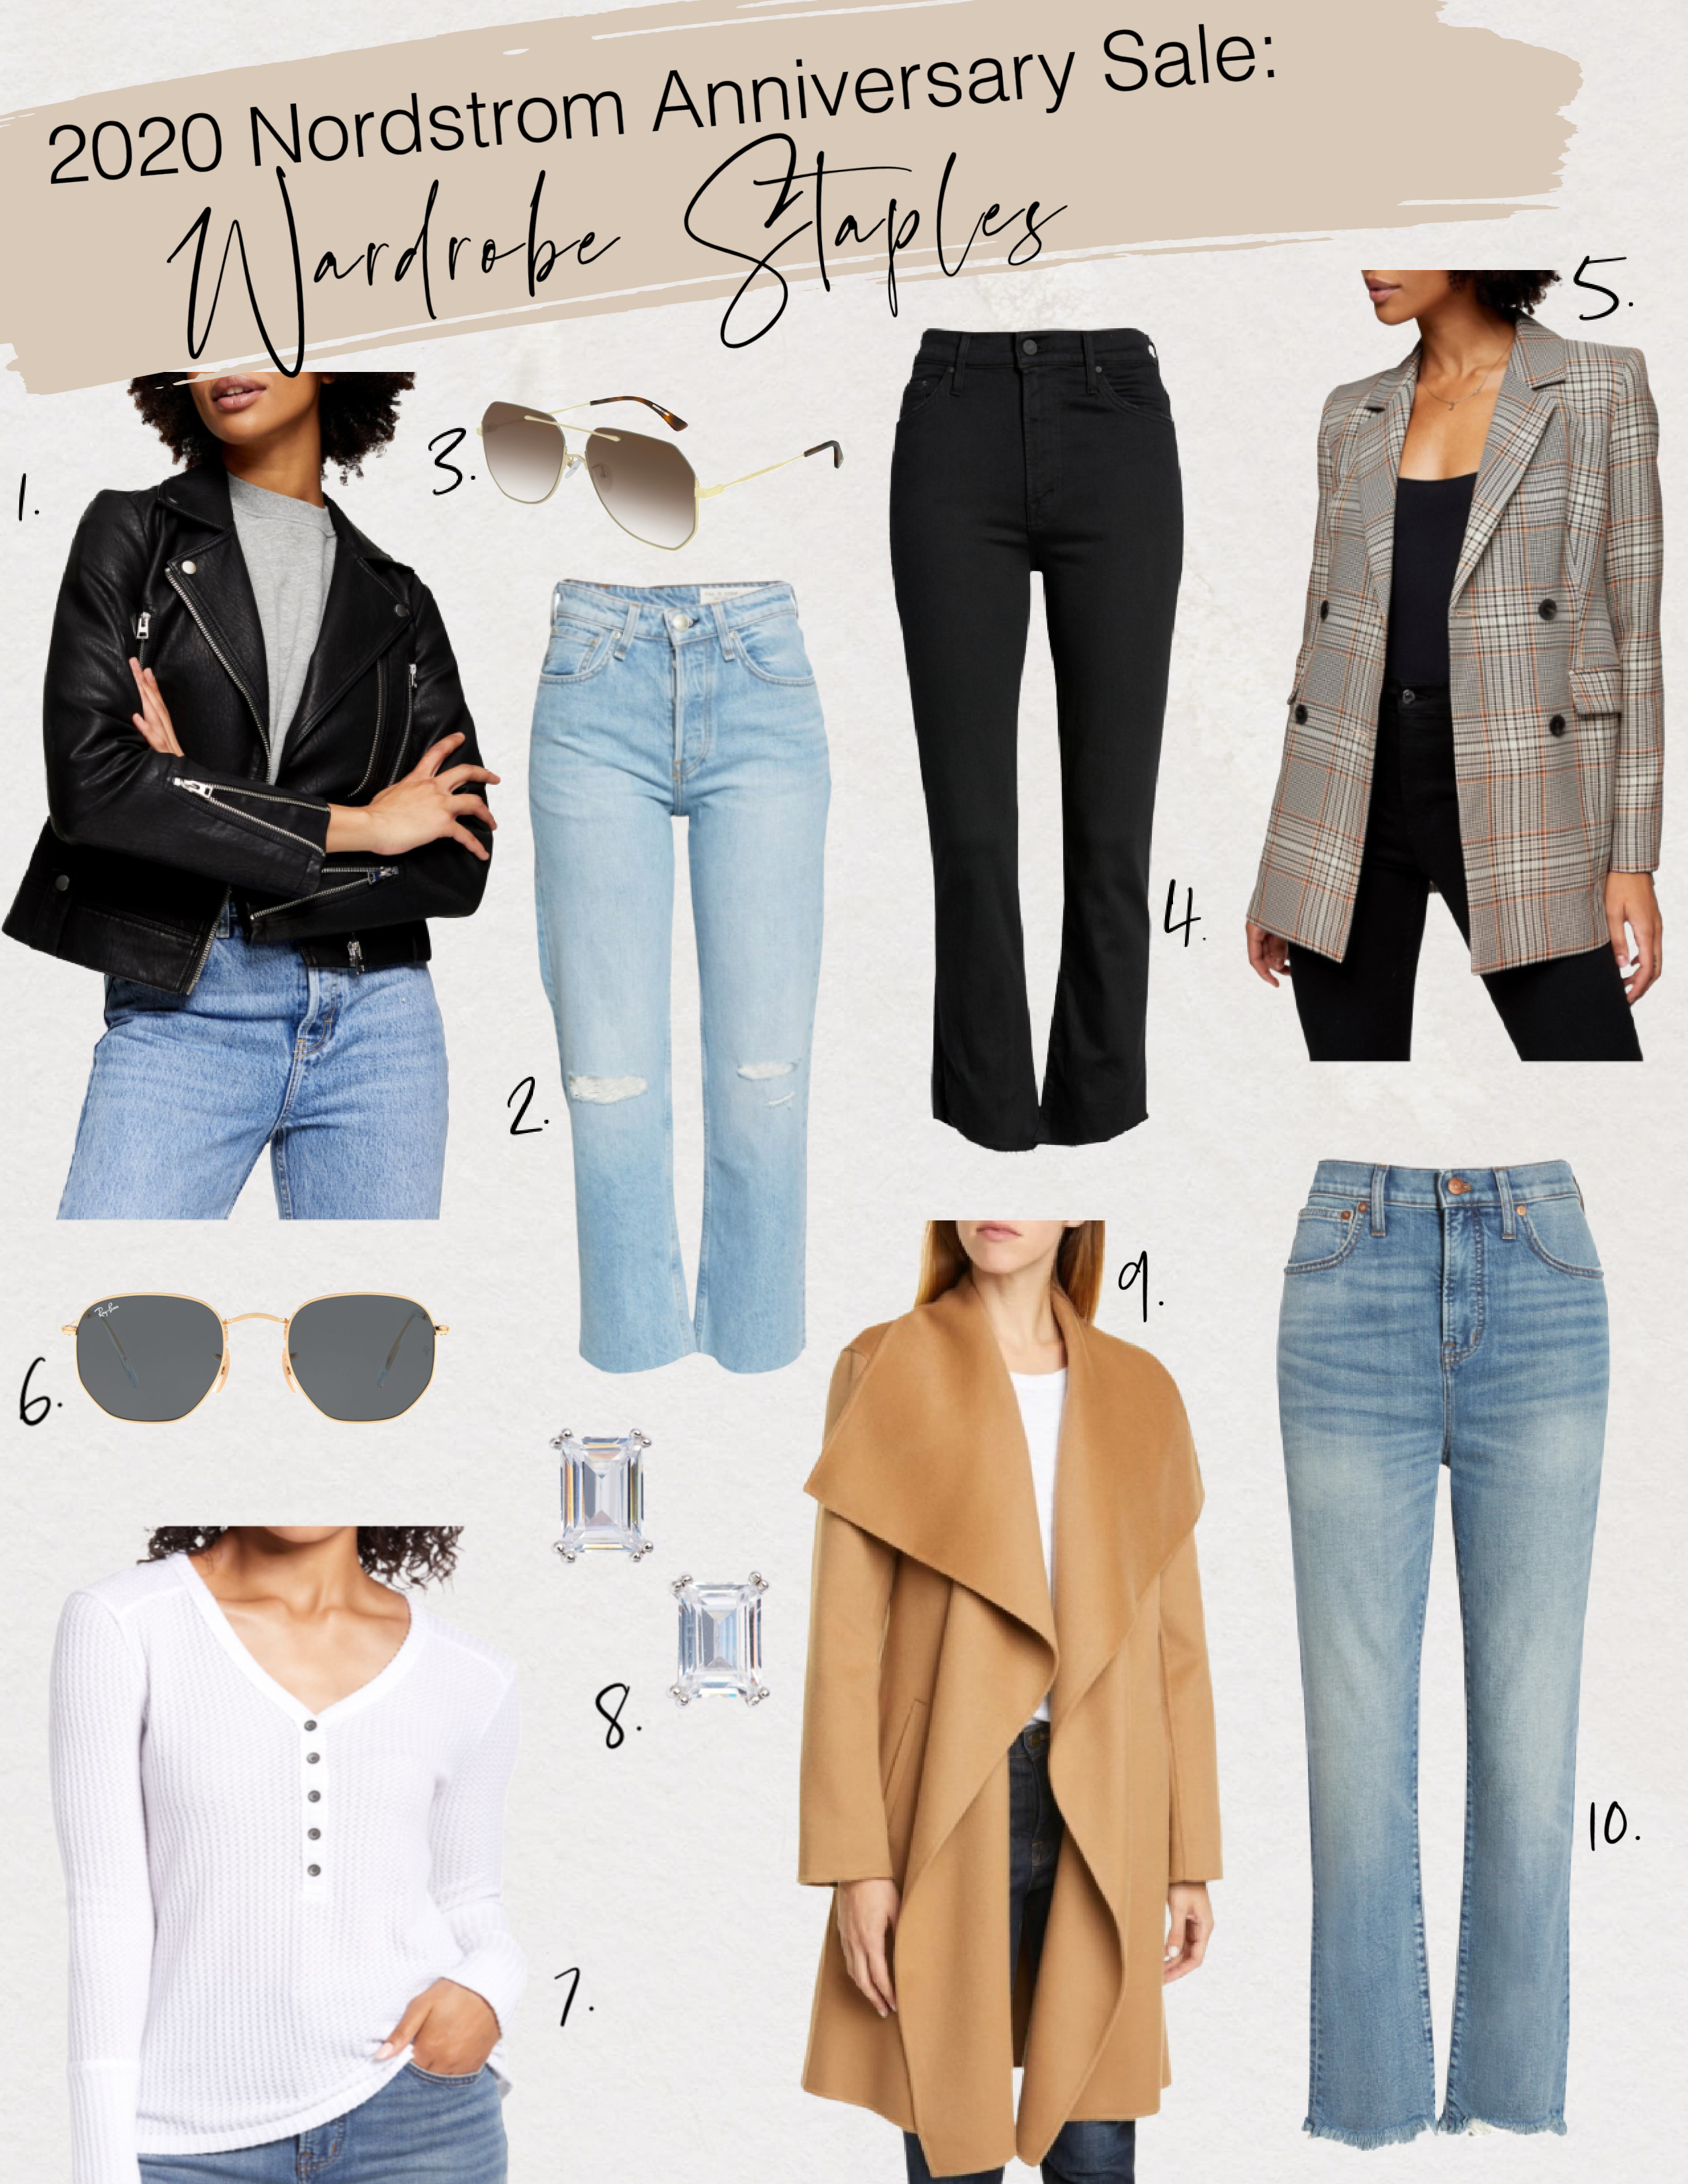 EVERYTHING YOU NEED FROM THE NORDSTROM ANNIVERSARY SALE